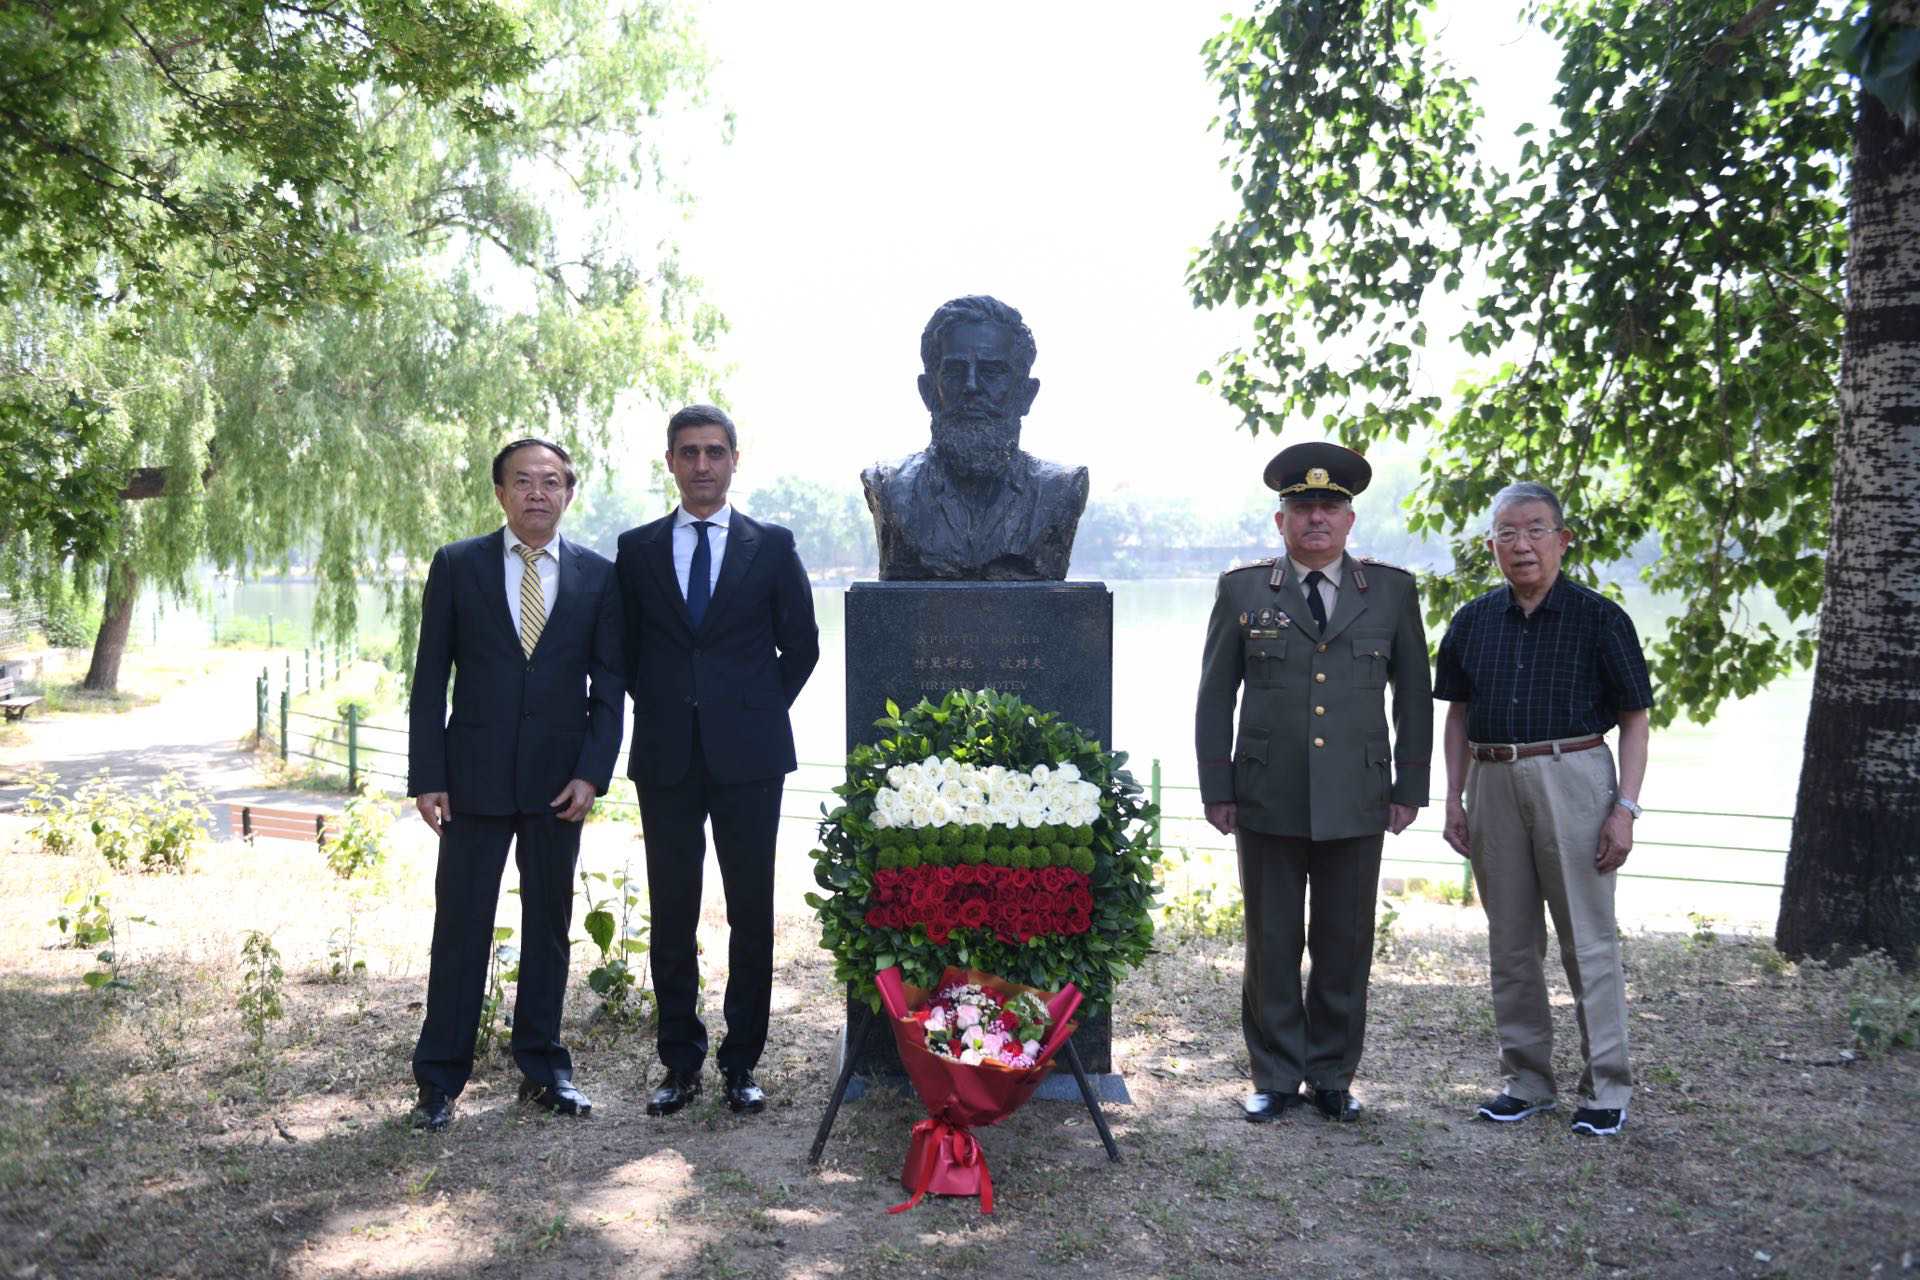 The Bulgarian Charge d’Affairs a.i. and Millitary Attache Conducted a Flower-presenting Ceremony on the Day for Commemorating Hristo Botev and the Bulgarian National Liberation Heroes – June 2 